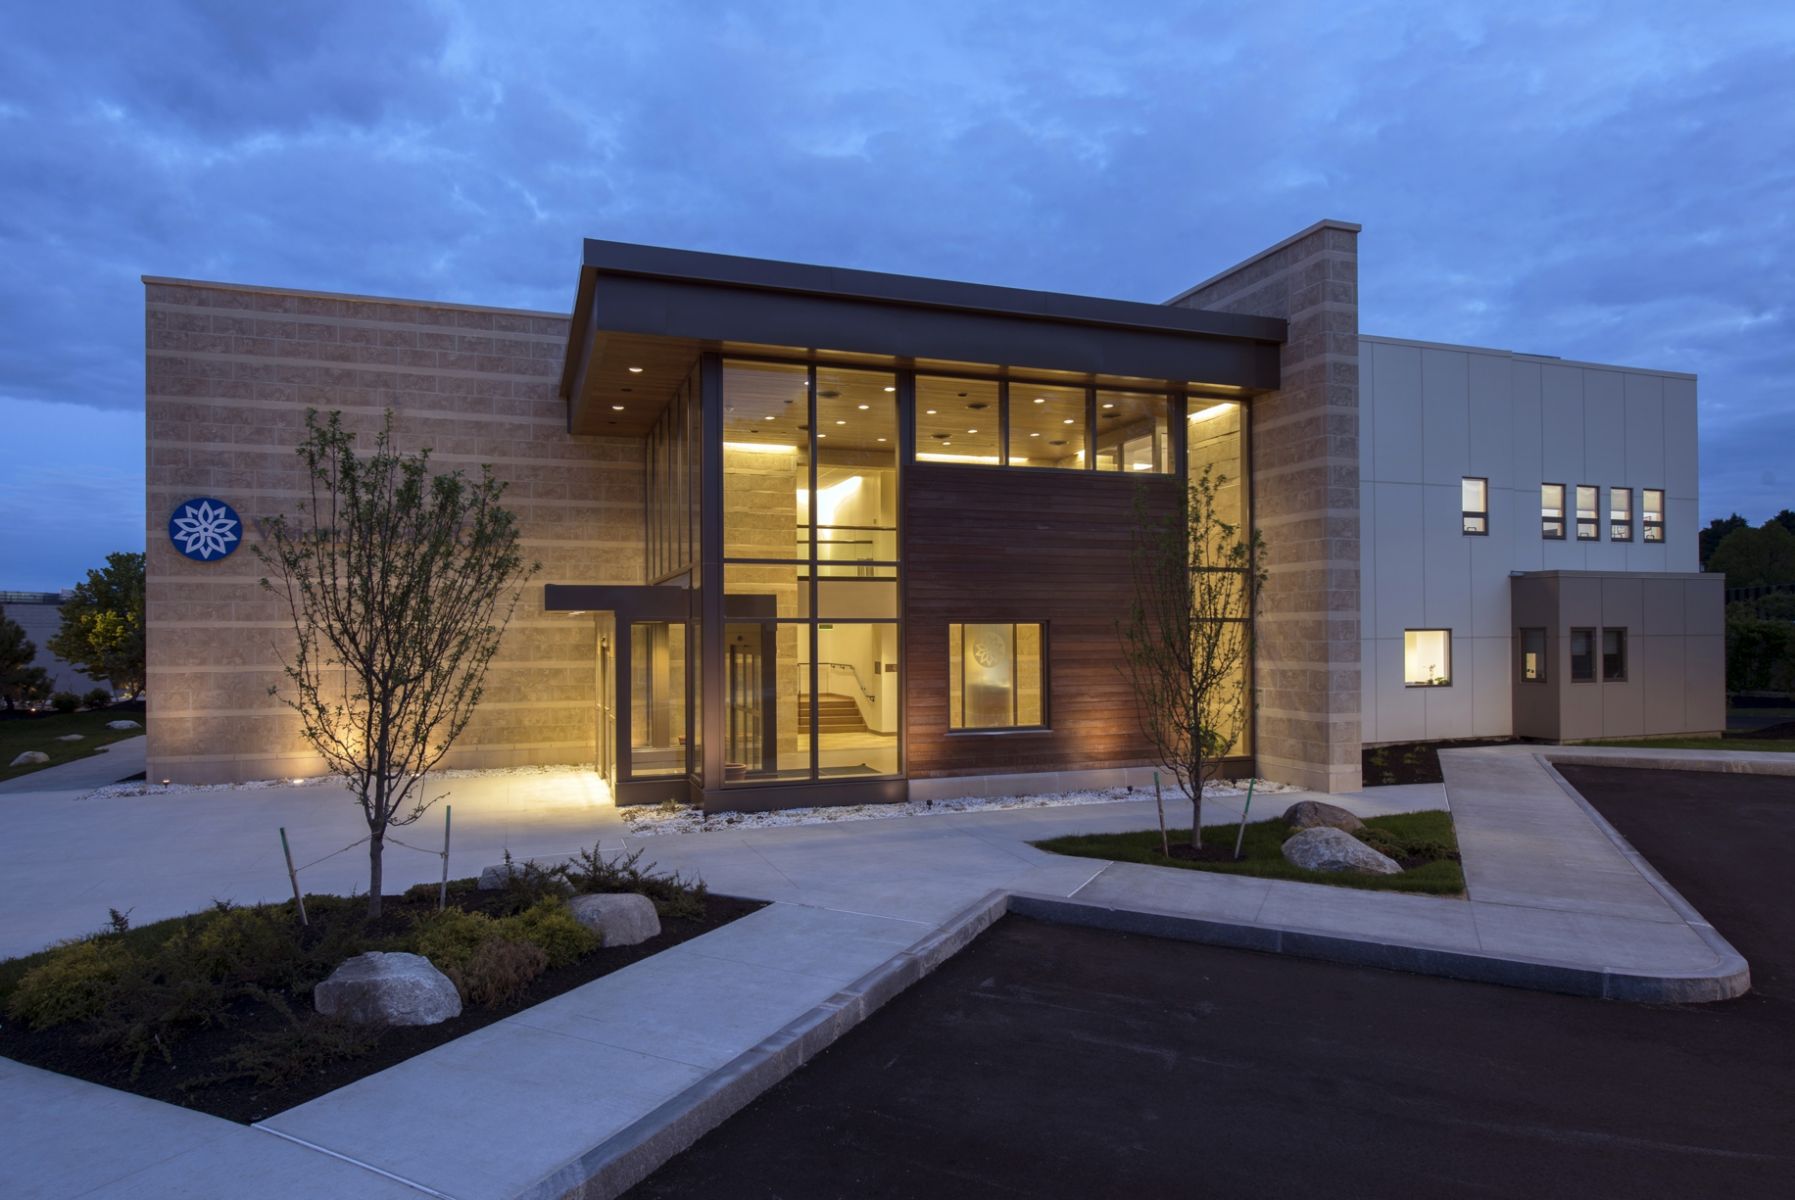 One Story Medical Office Building Designs